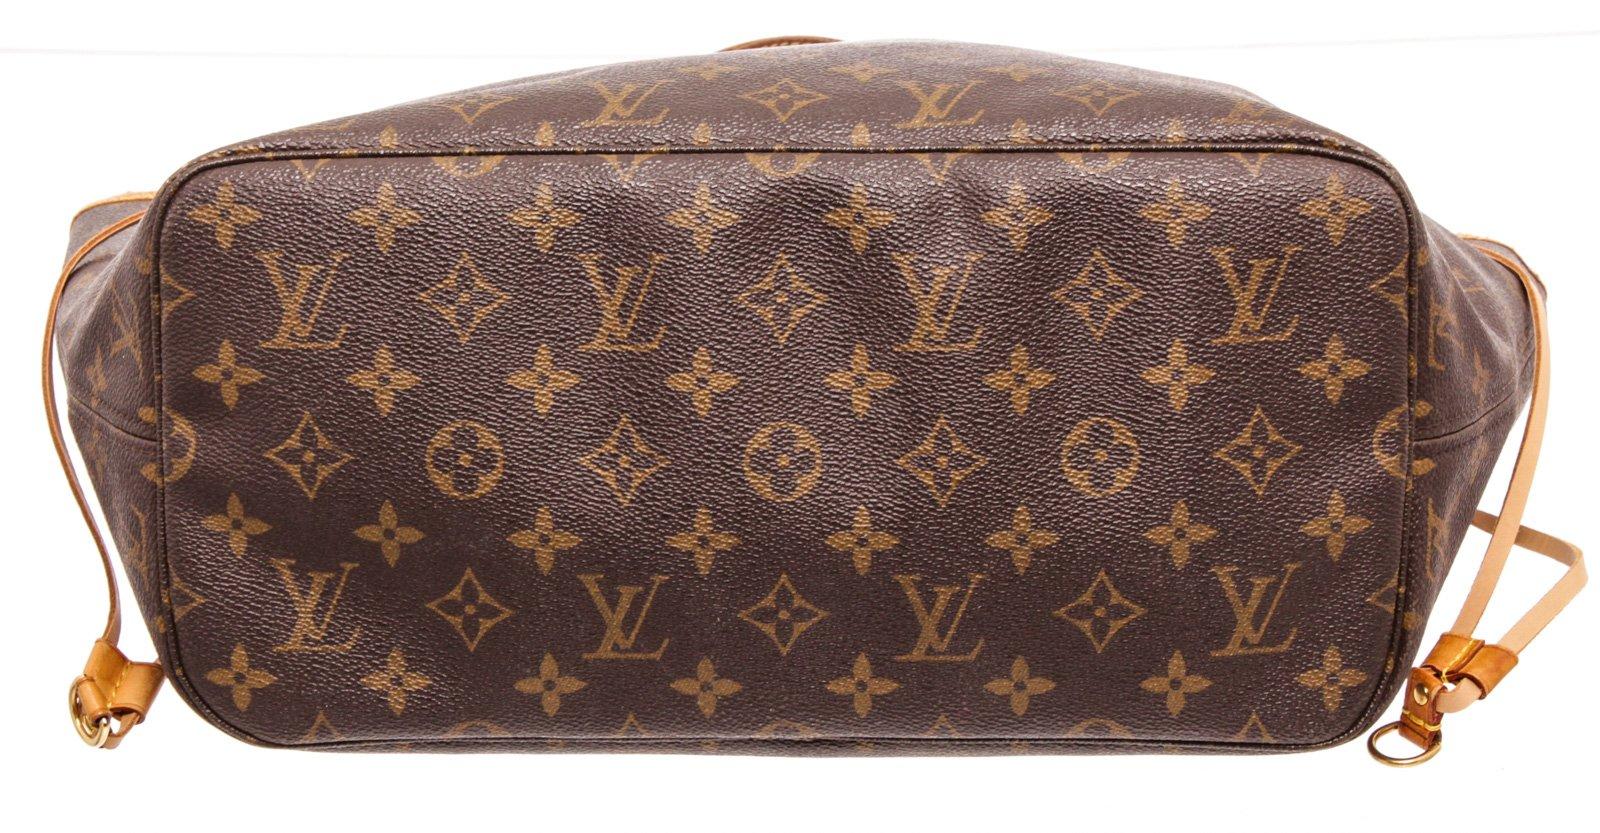 Women's Louis Vuitton Monogram Canvas Leather Neverfull MM Tote Bag